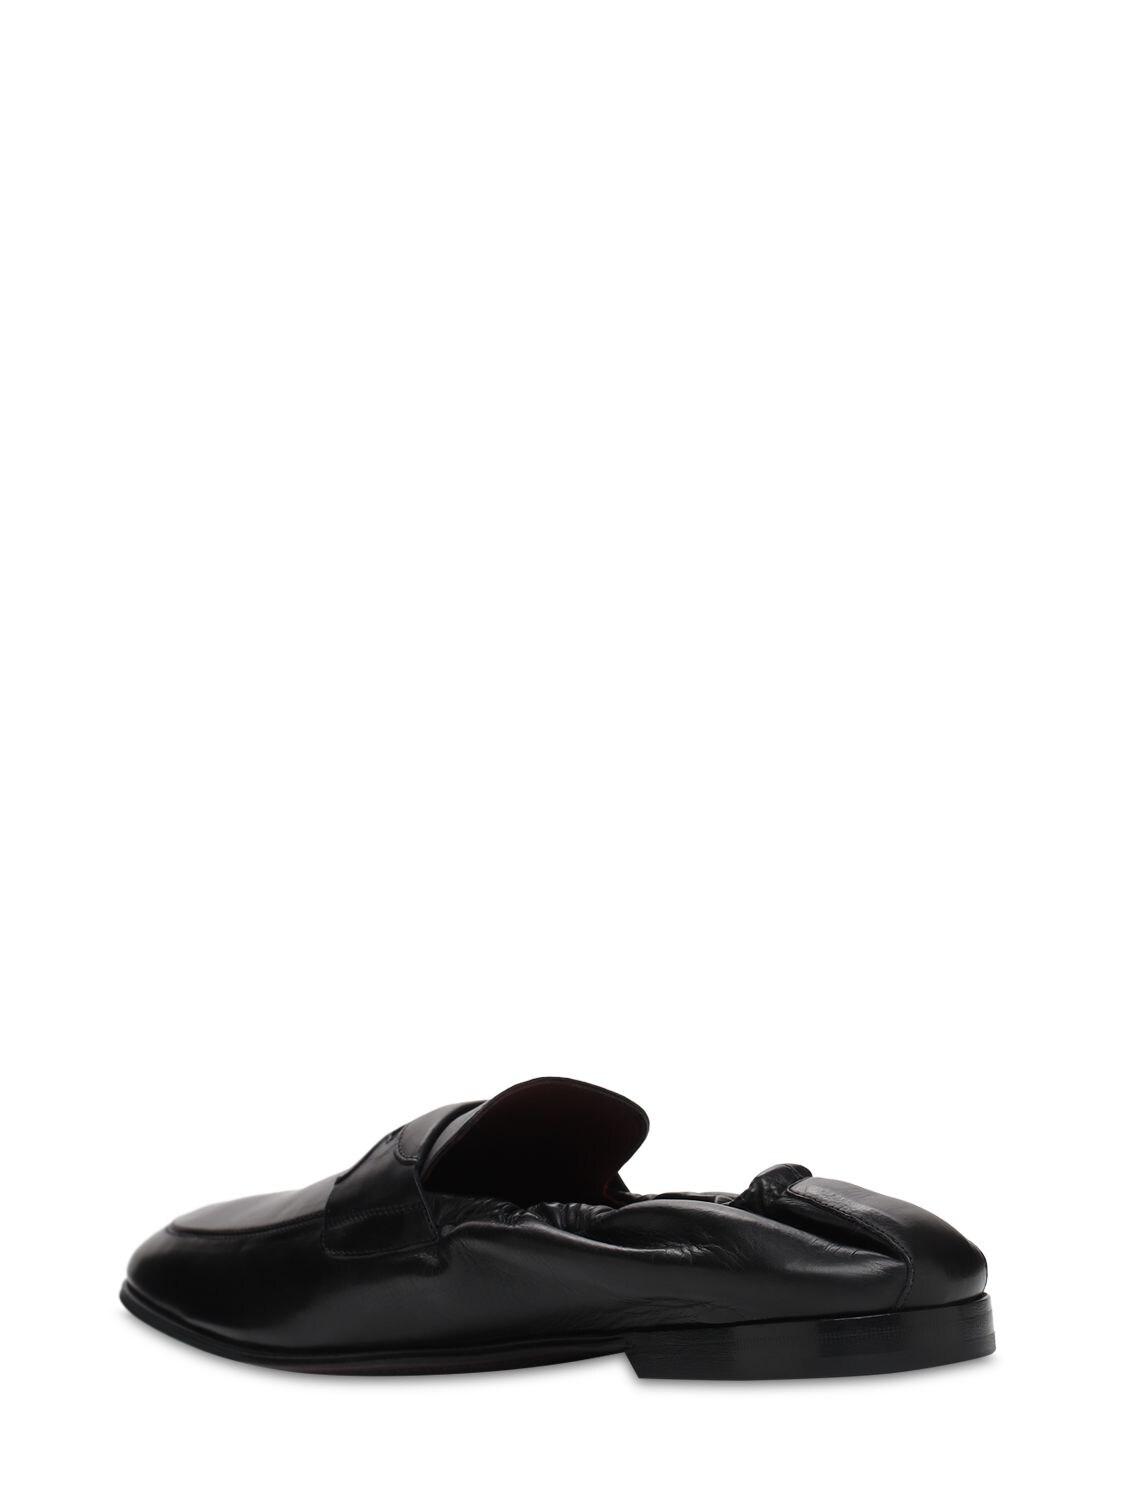 Dolce & Gabbana Ariosto Leather Loafers in Black for Men | Lyst